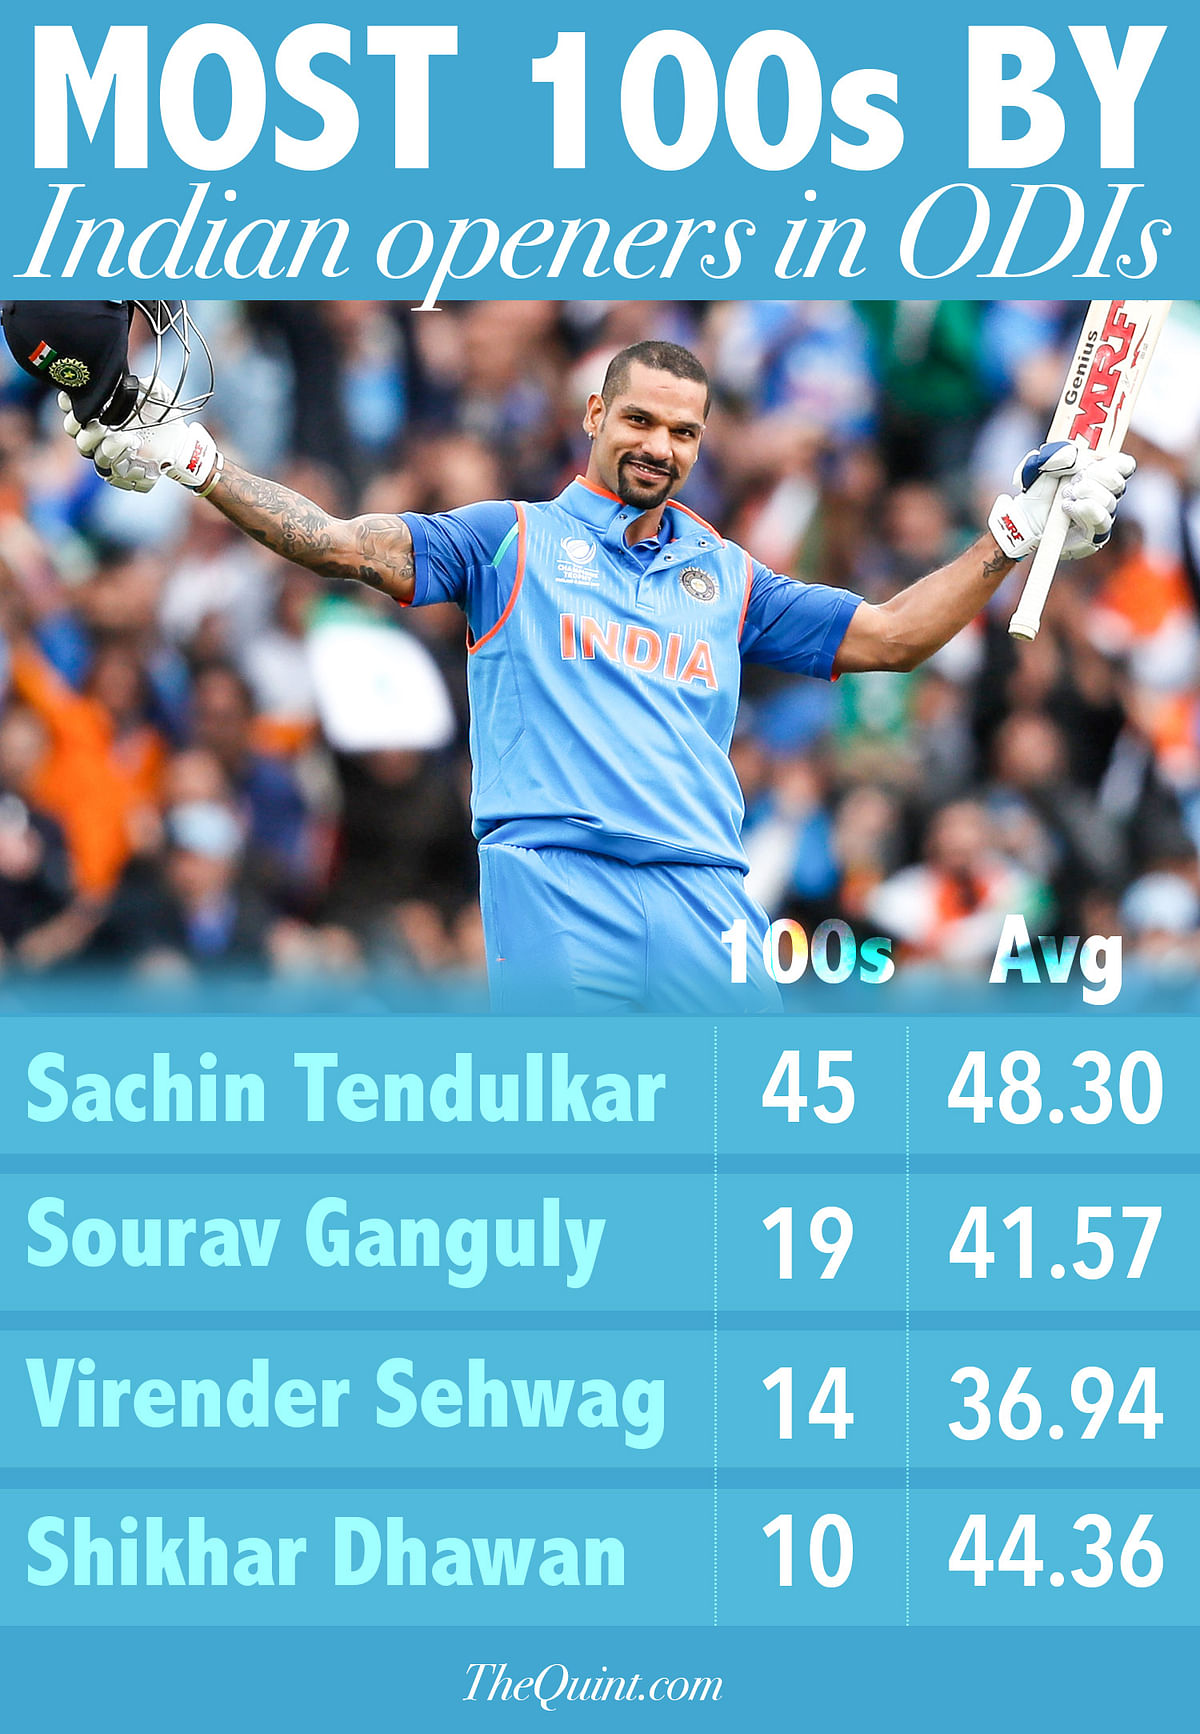 After 78 ODIs, only de Kock (12) and Amla (11) had scored more hundreds than Dhawan’s tally of 10.